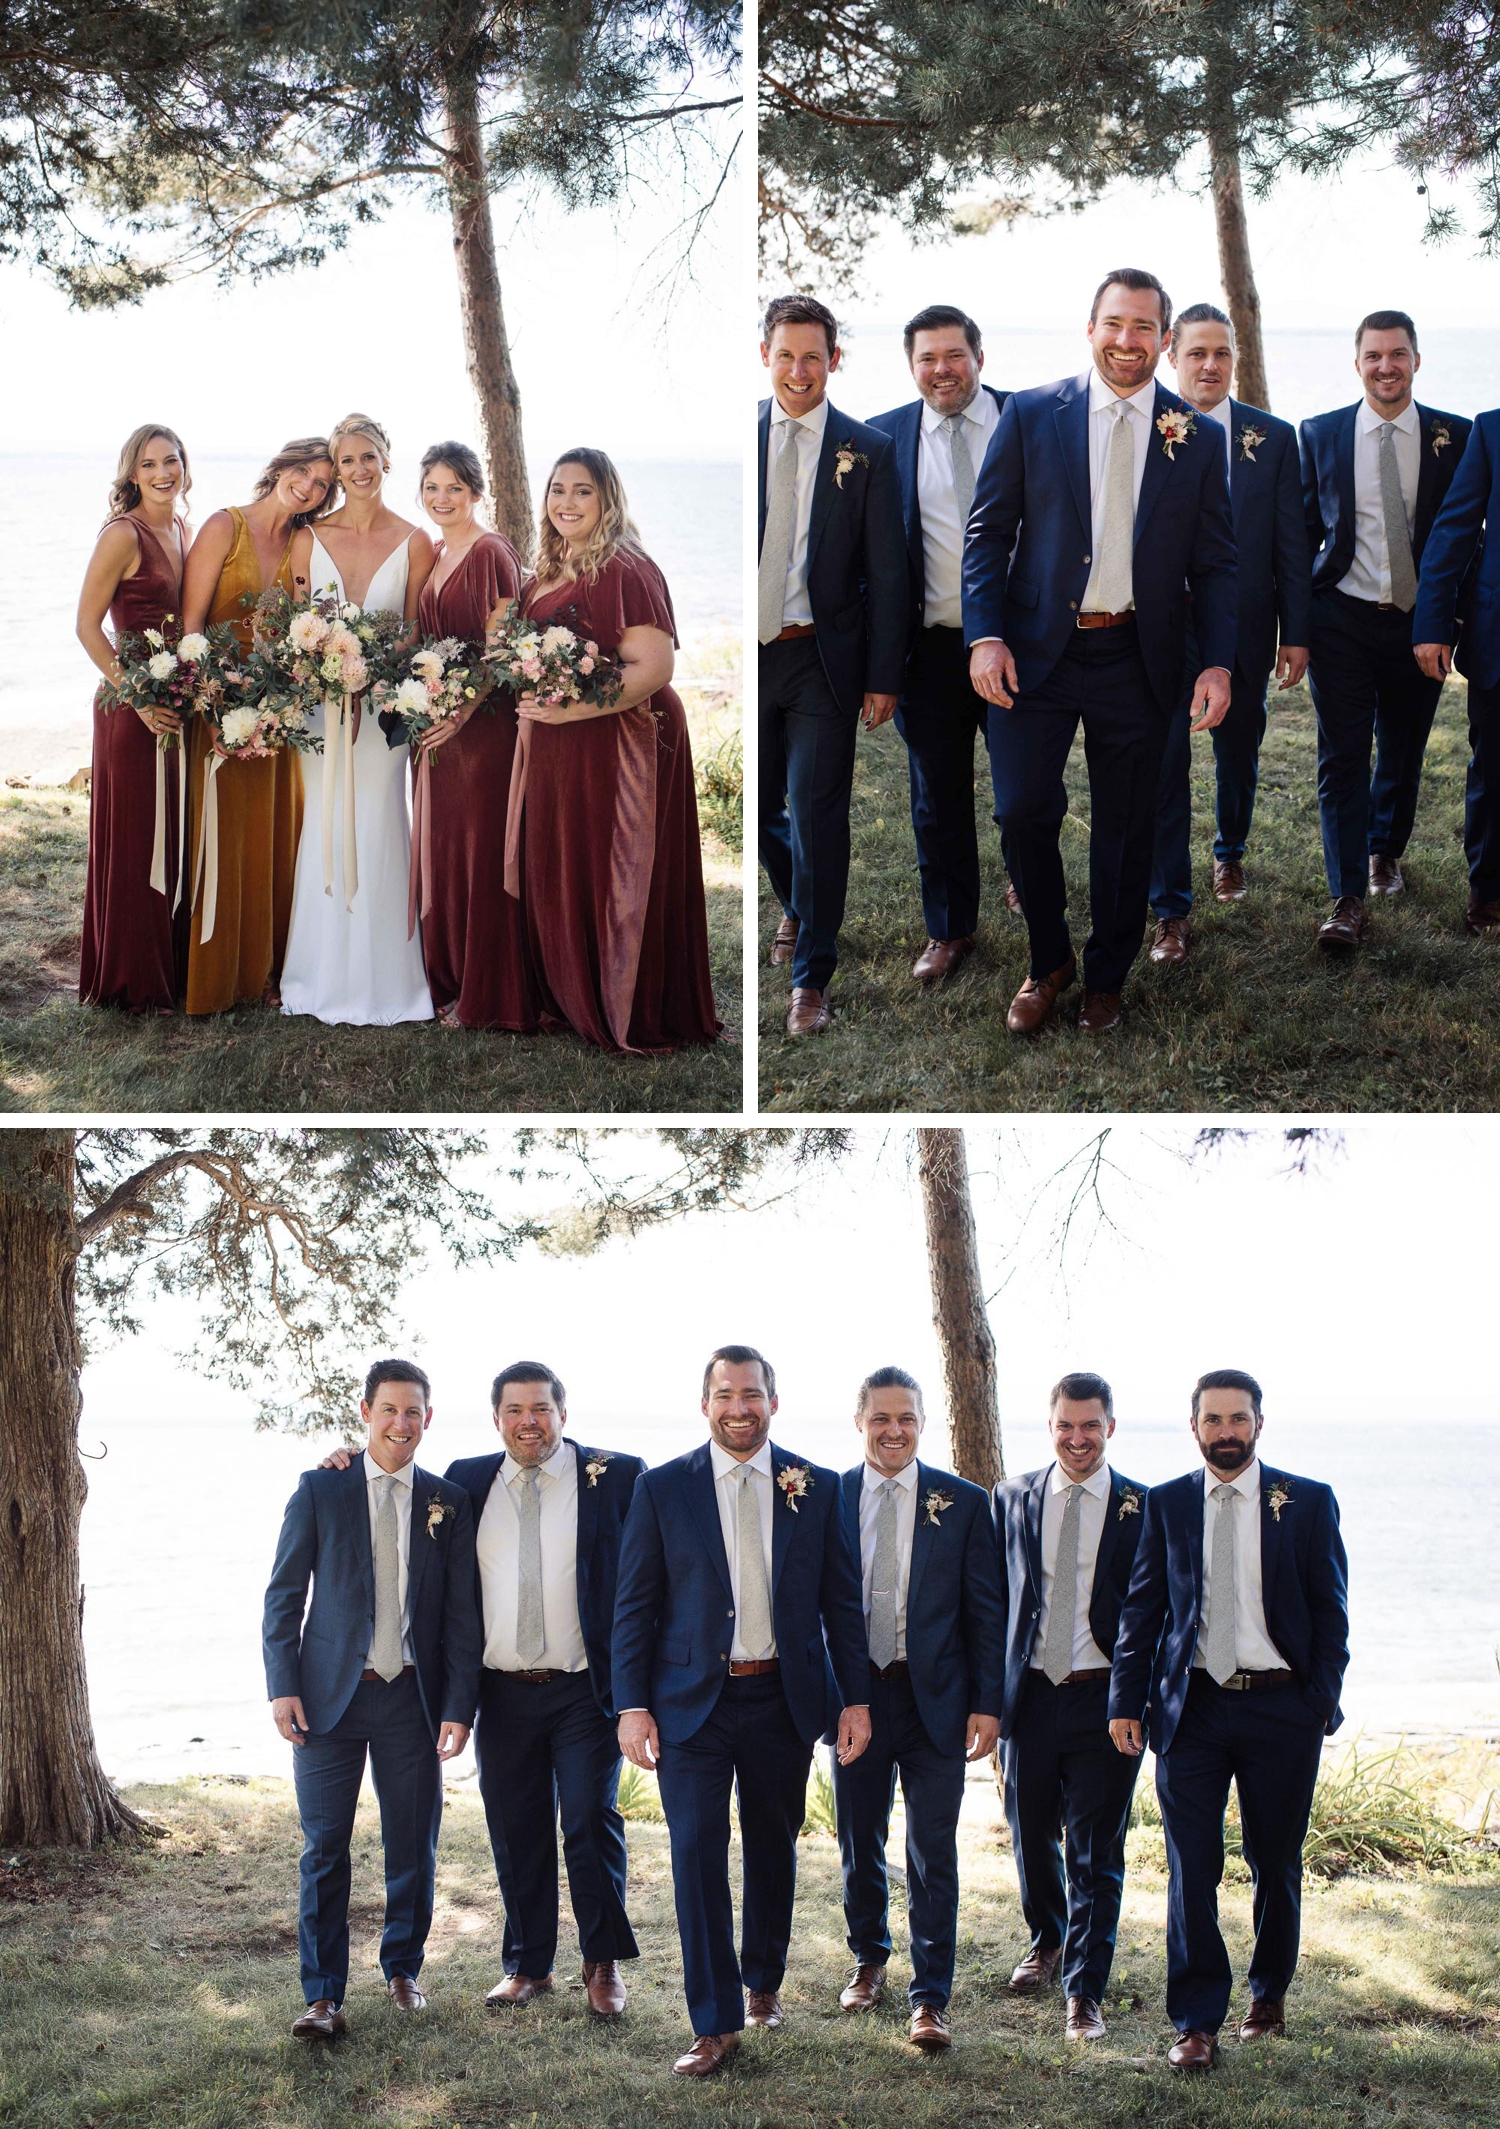 Fall wedding wedding party in navy, rose and marigold